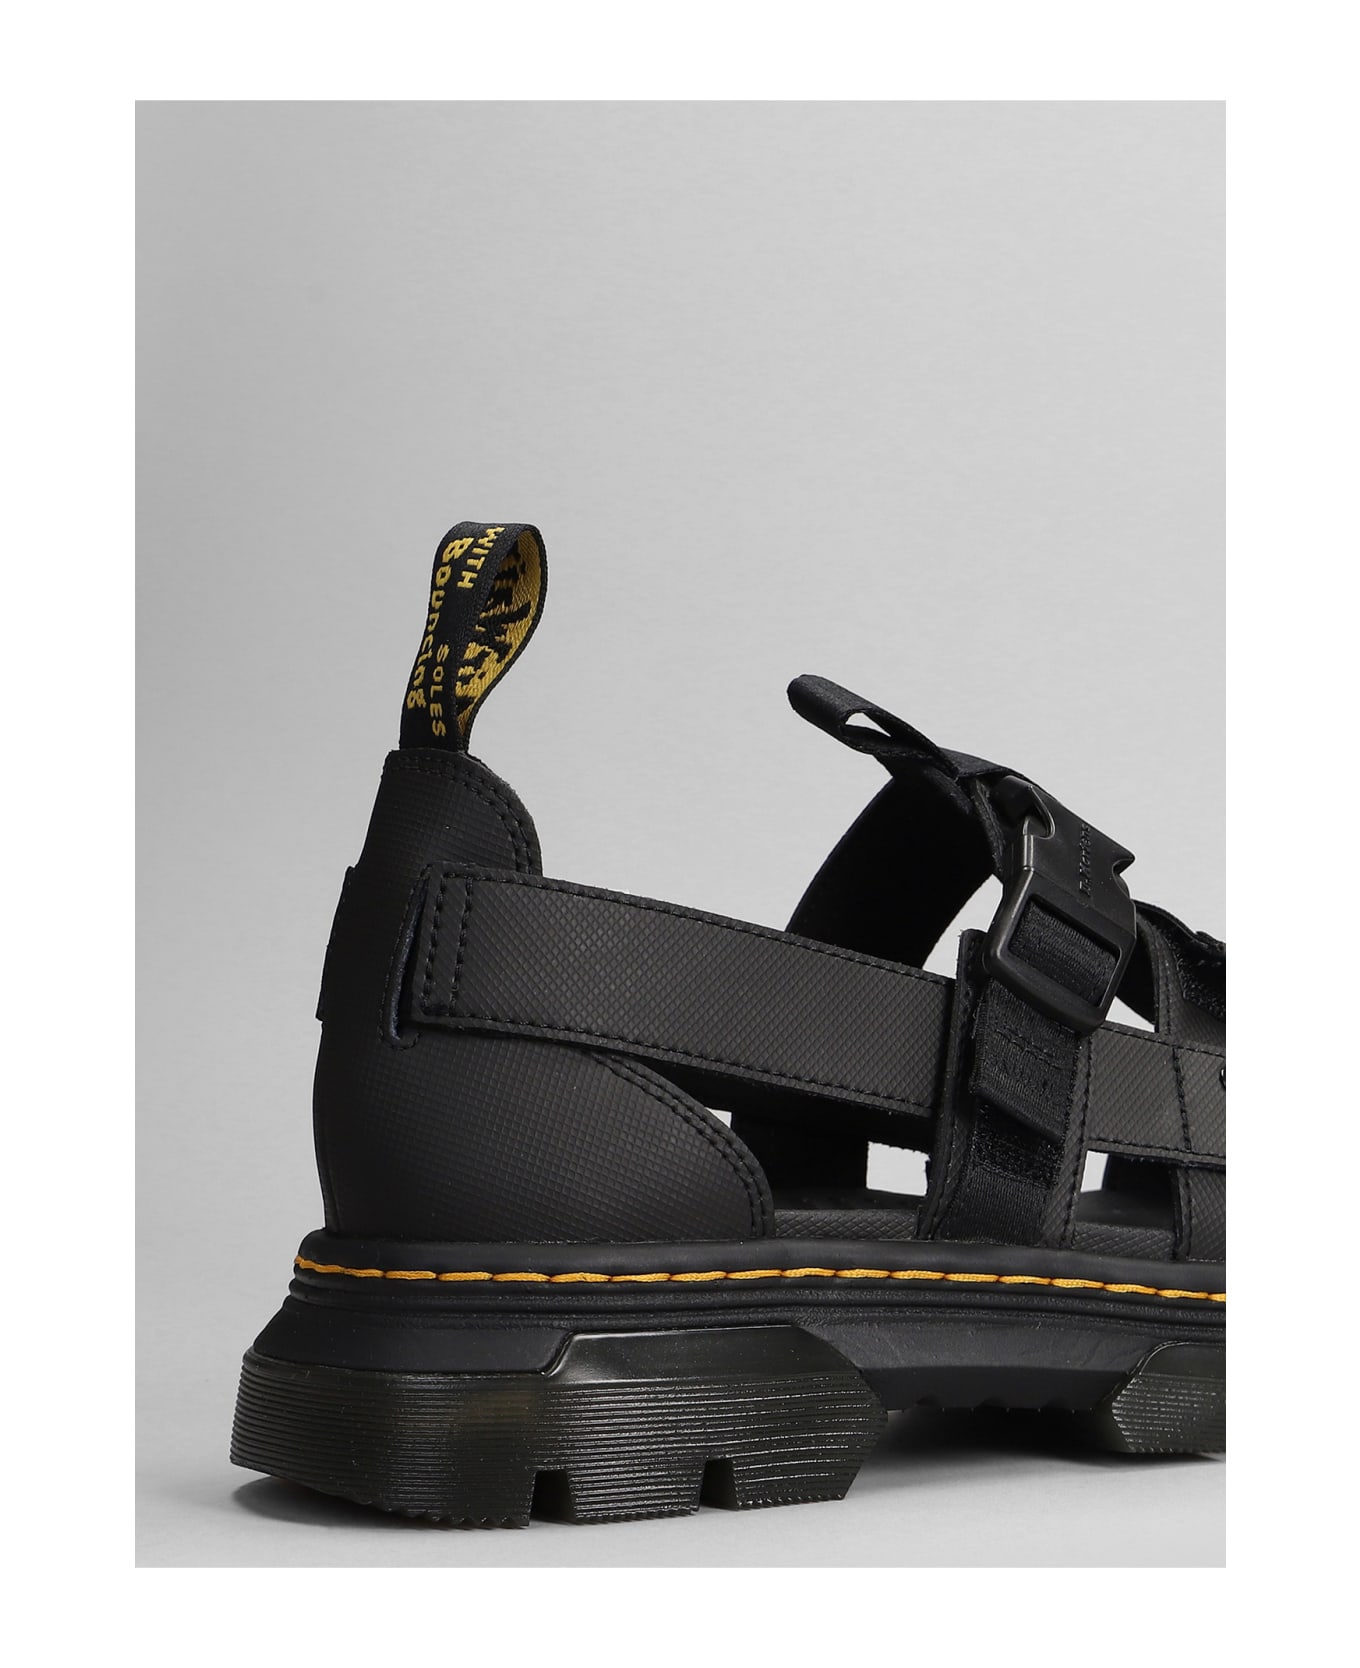 Dr. Martens Pearson Sandals In Black Leather - black